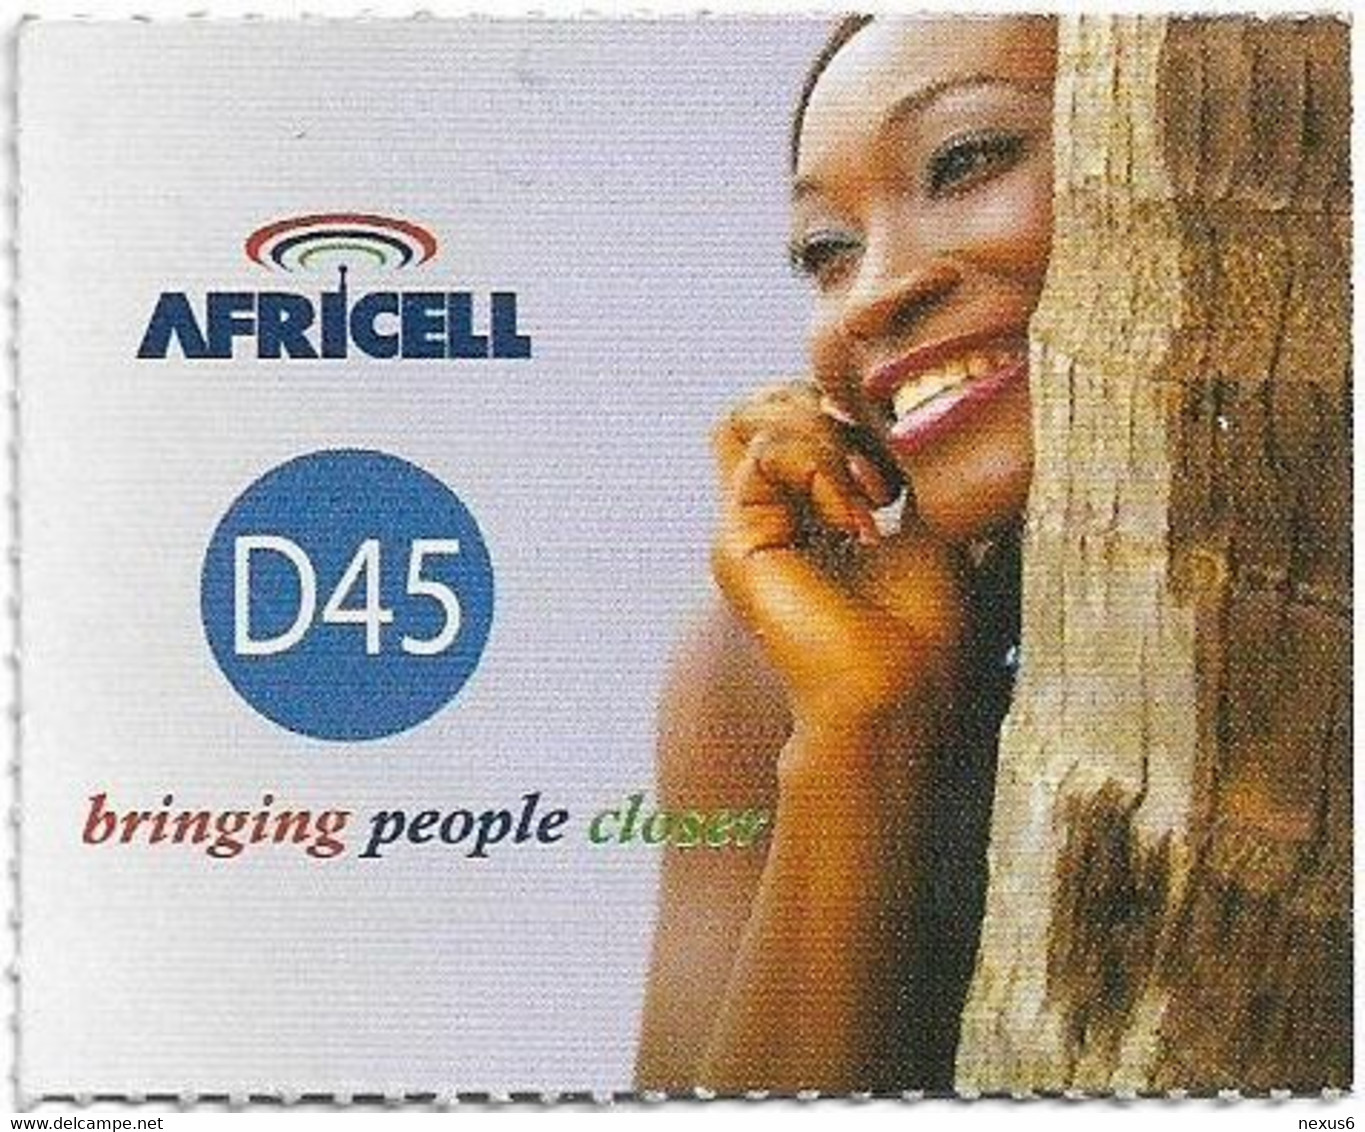 Gambia - Africell - Bringing People Closer, Woman On Phone, GSM Refill 45GD, Used - Gambie